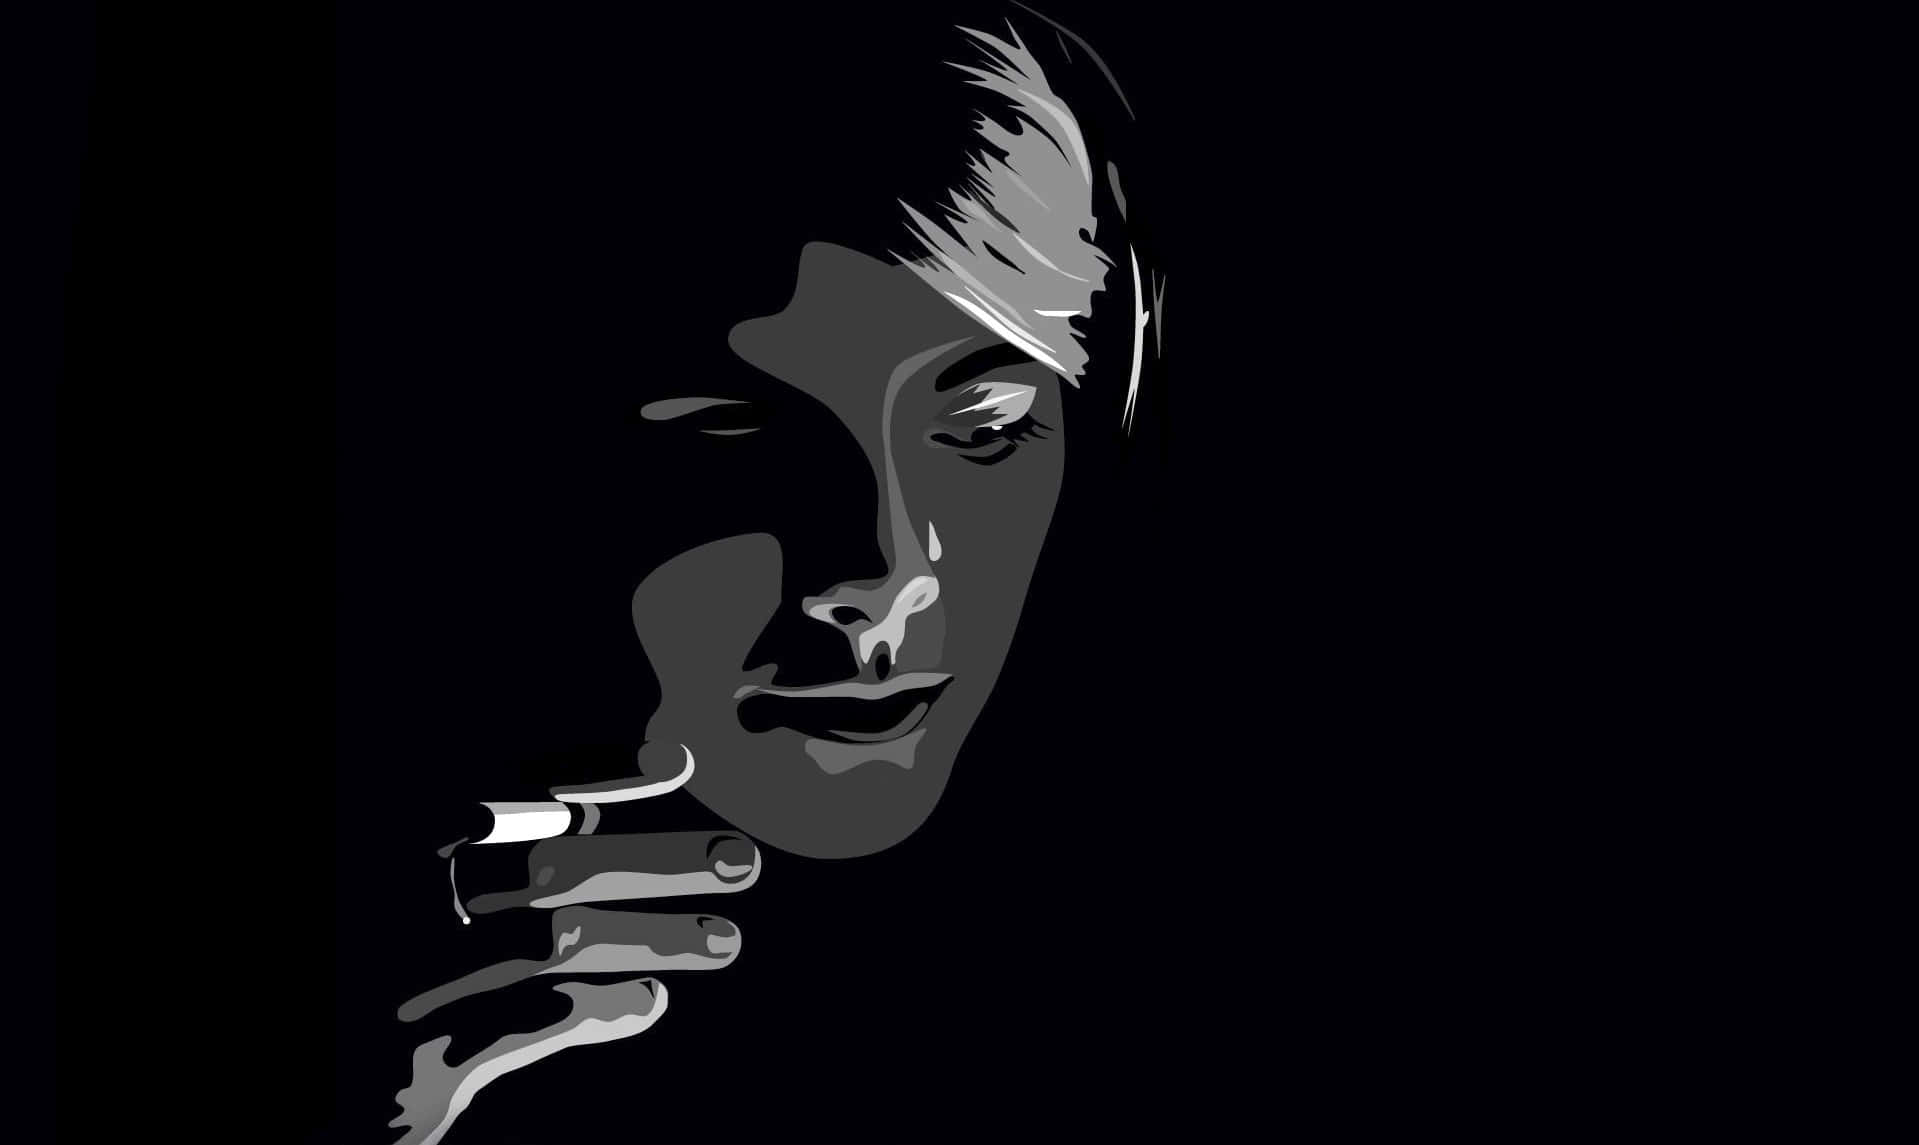 Black Graphic Design Art Crying With Cigarette Background